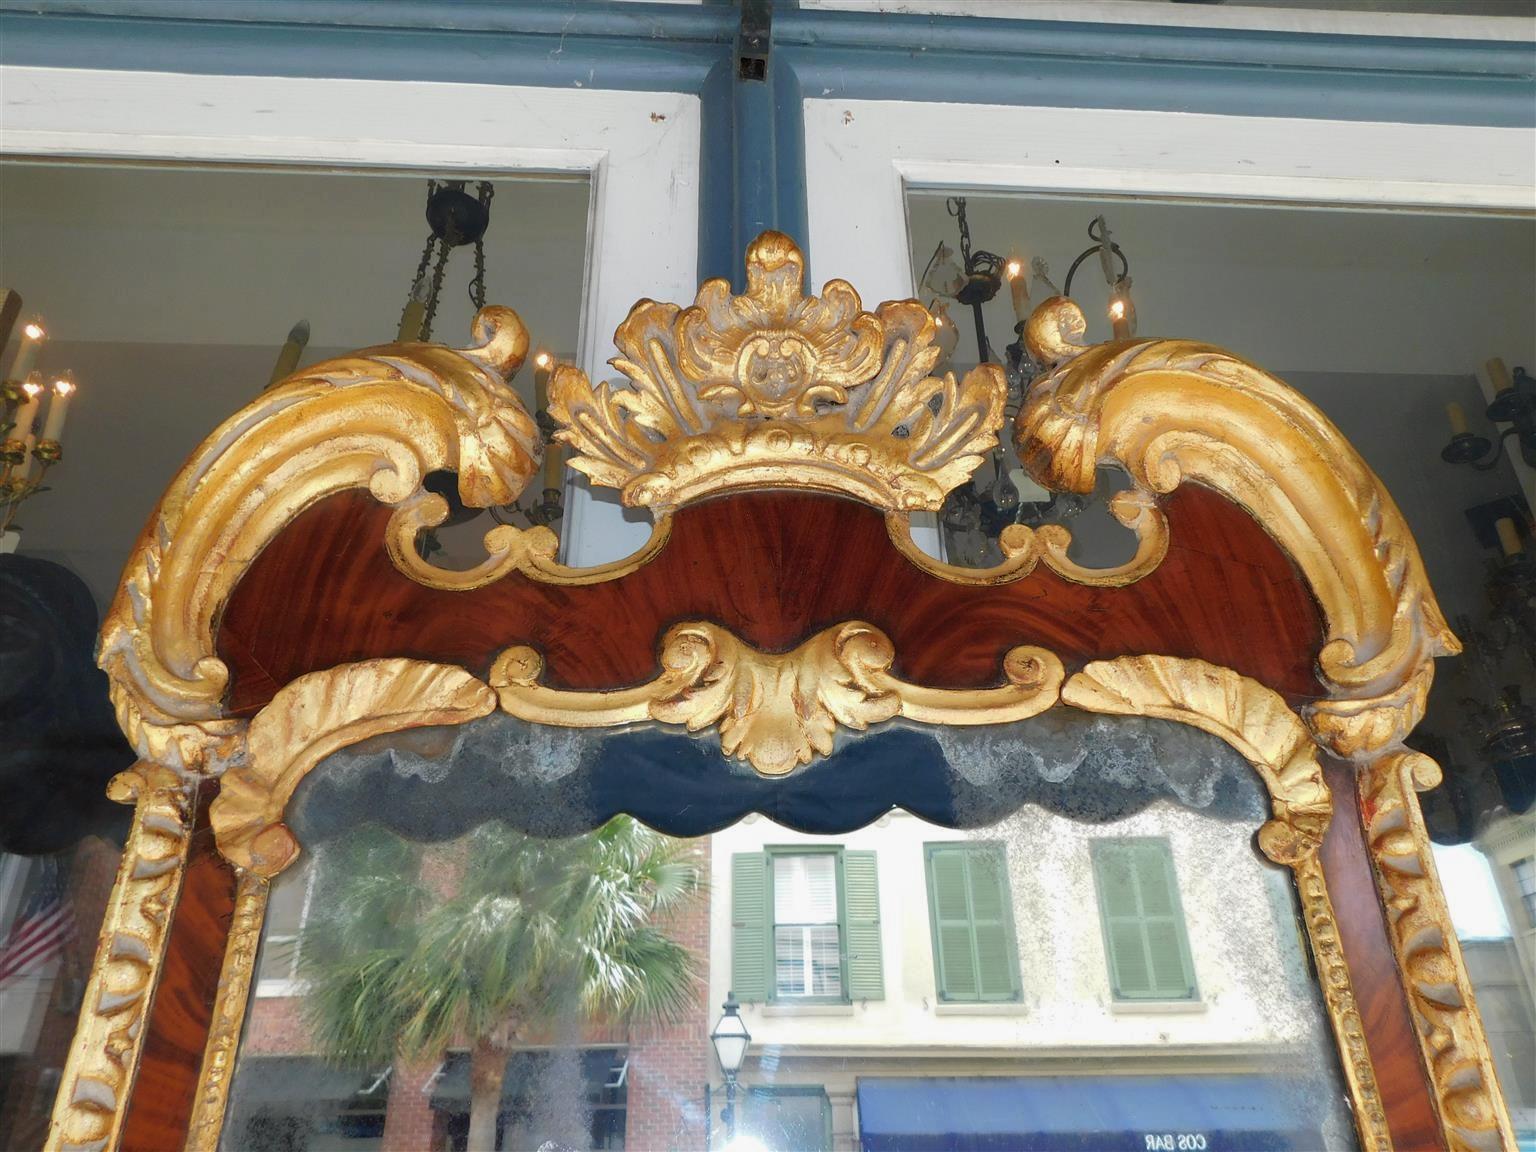 English Chippendale Mahogany Gilt Carved Wood & Gesso Floral Wall Mirror C. 1750 In Excellent Condition For Sale In Hollywood, SC